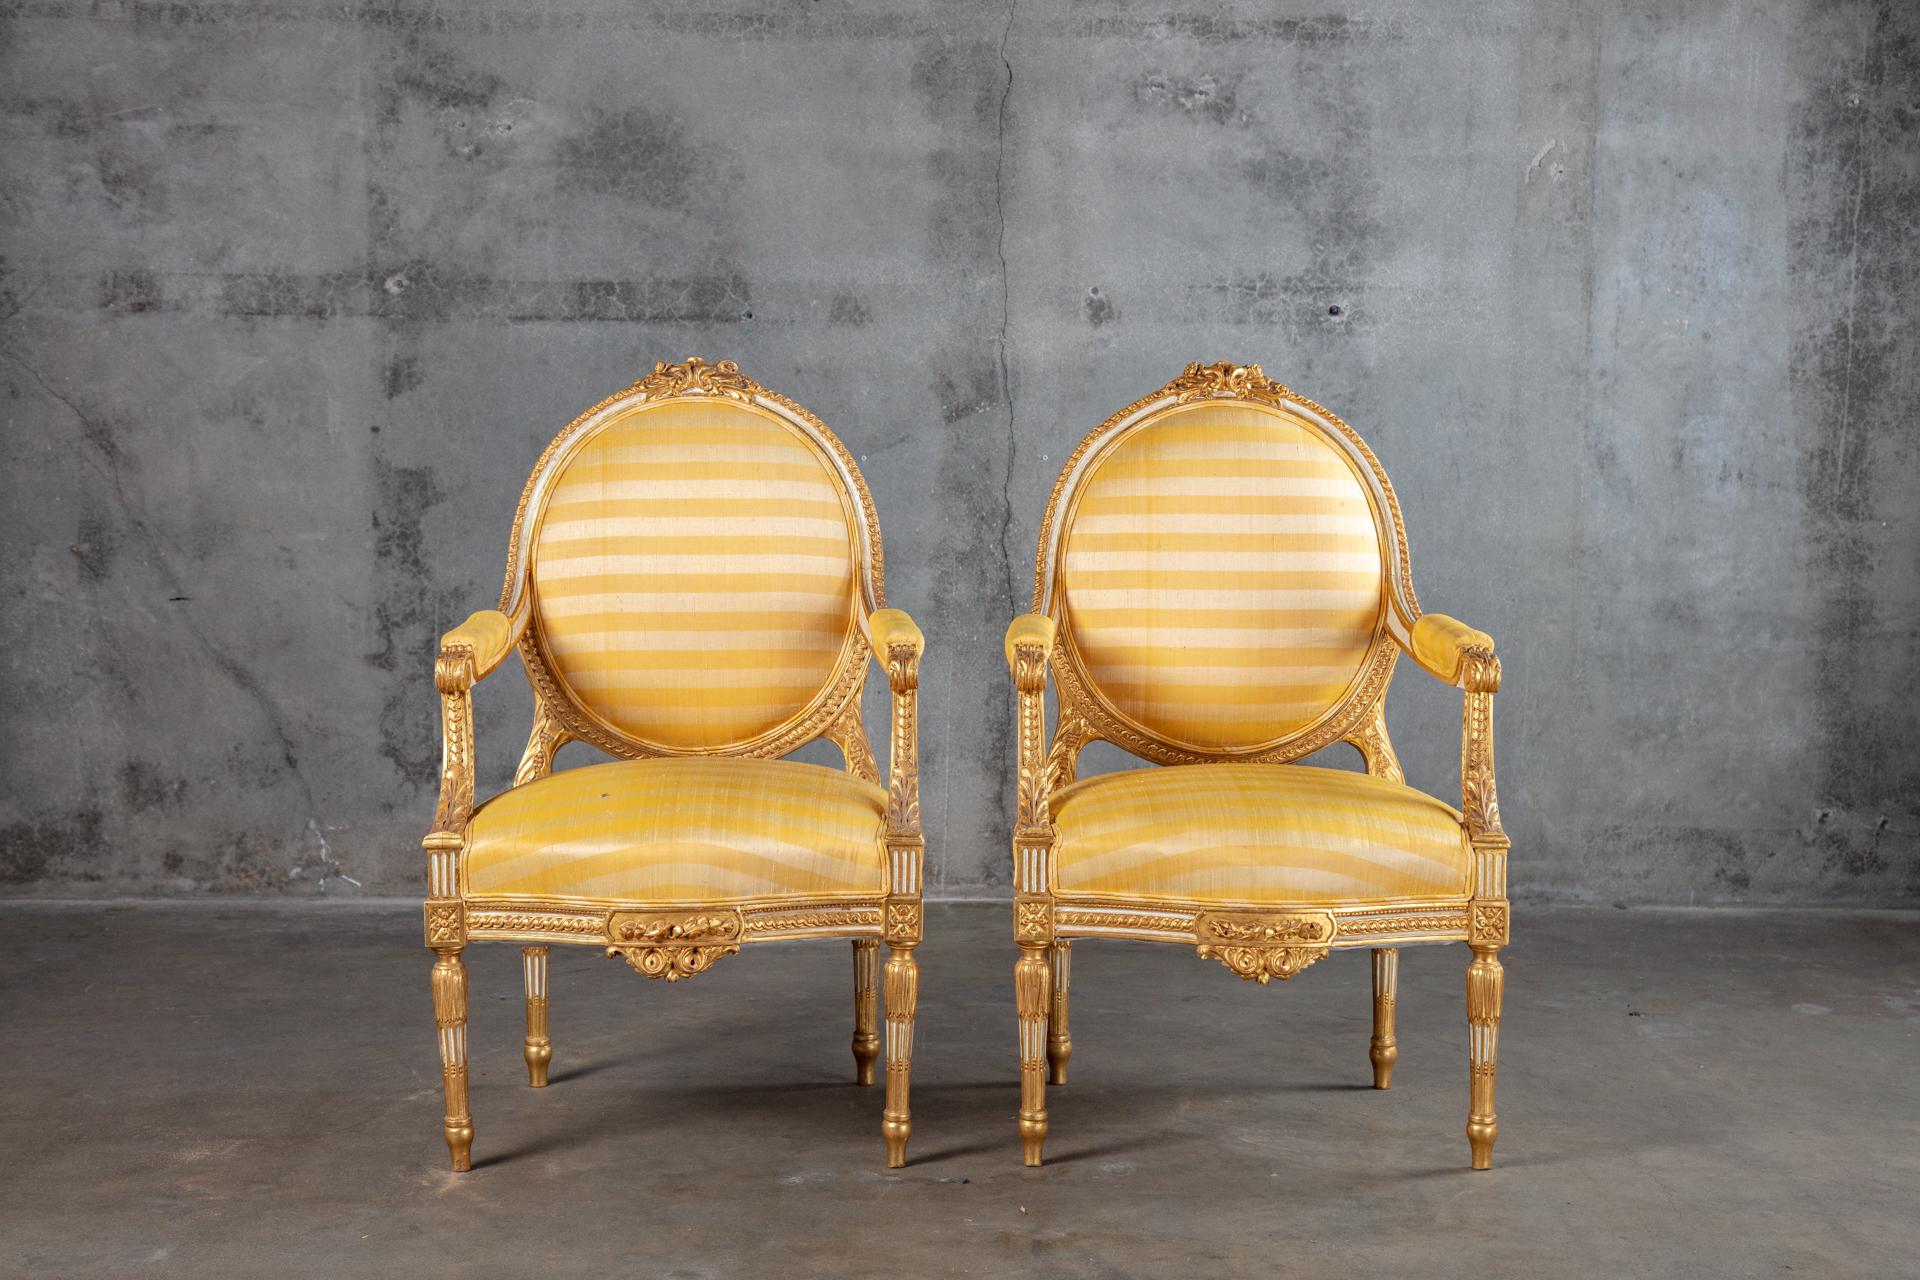 Silk Giltwood Armchairs Upholstered in Yellow Striped Fabric For Sale